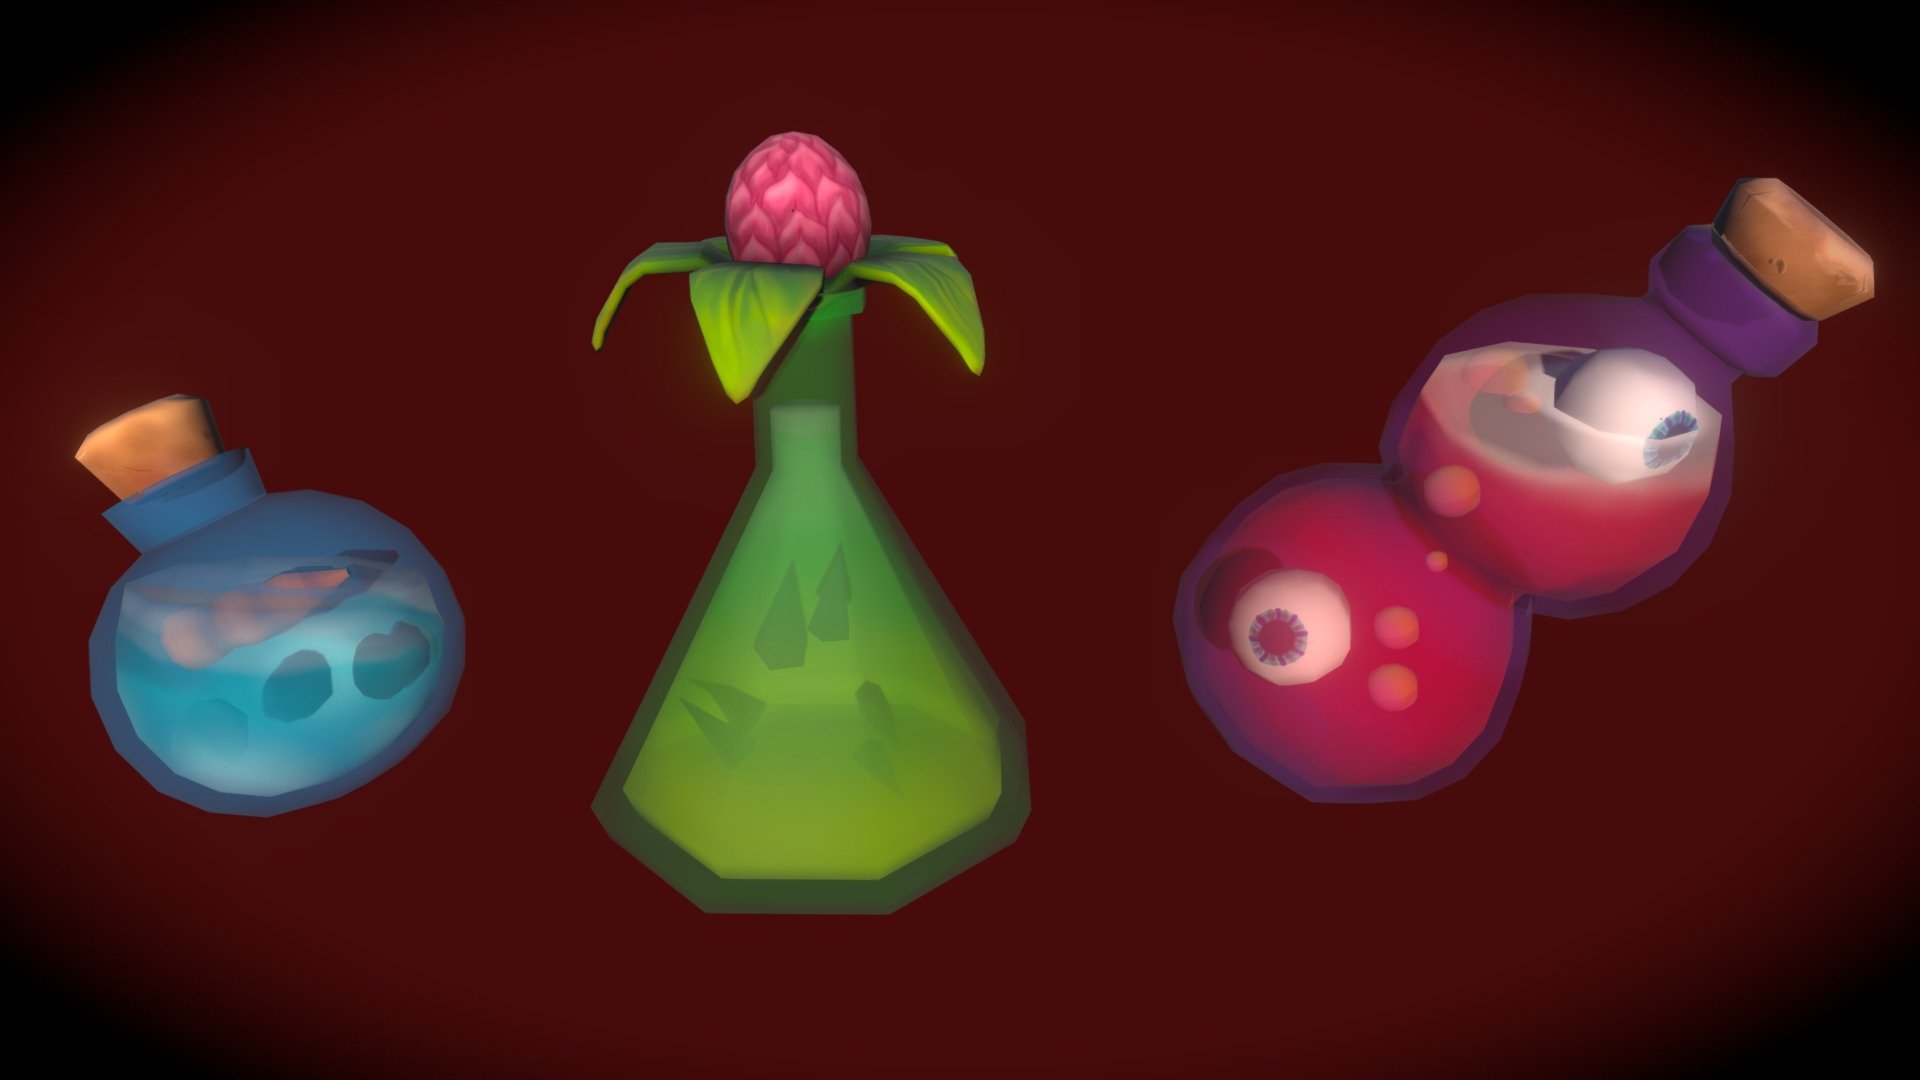 Potion Bottles: Frost, Thorns, & Insight